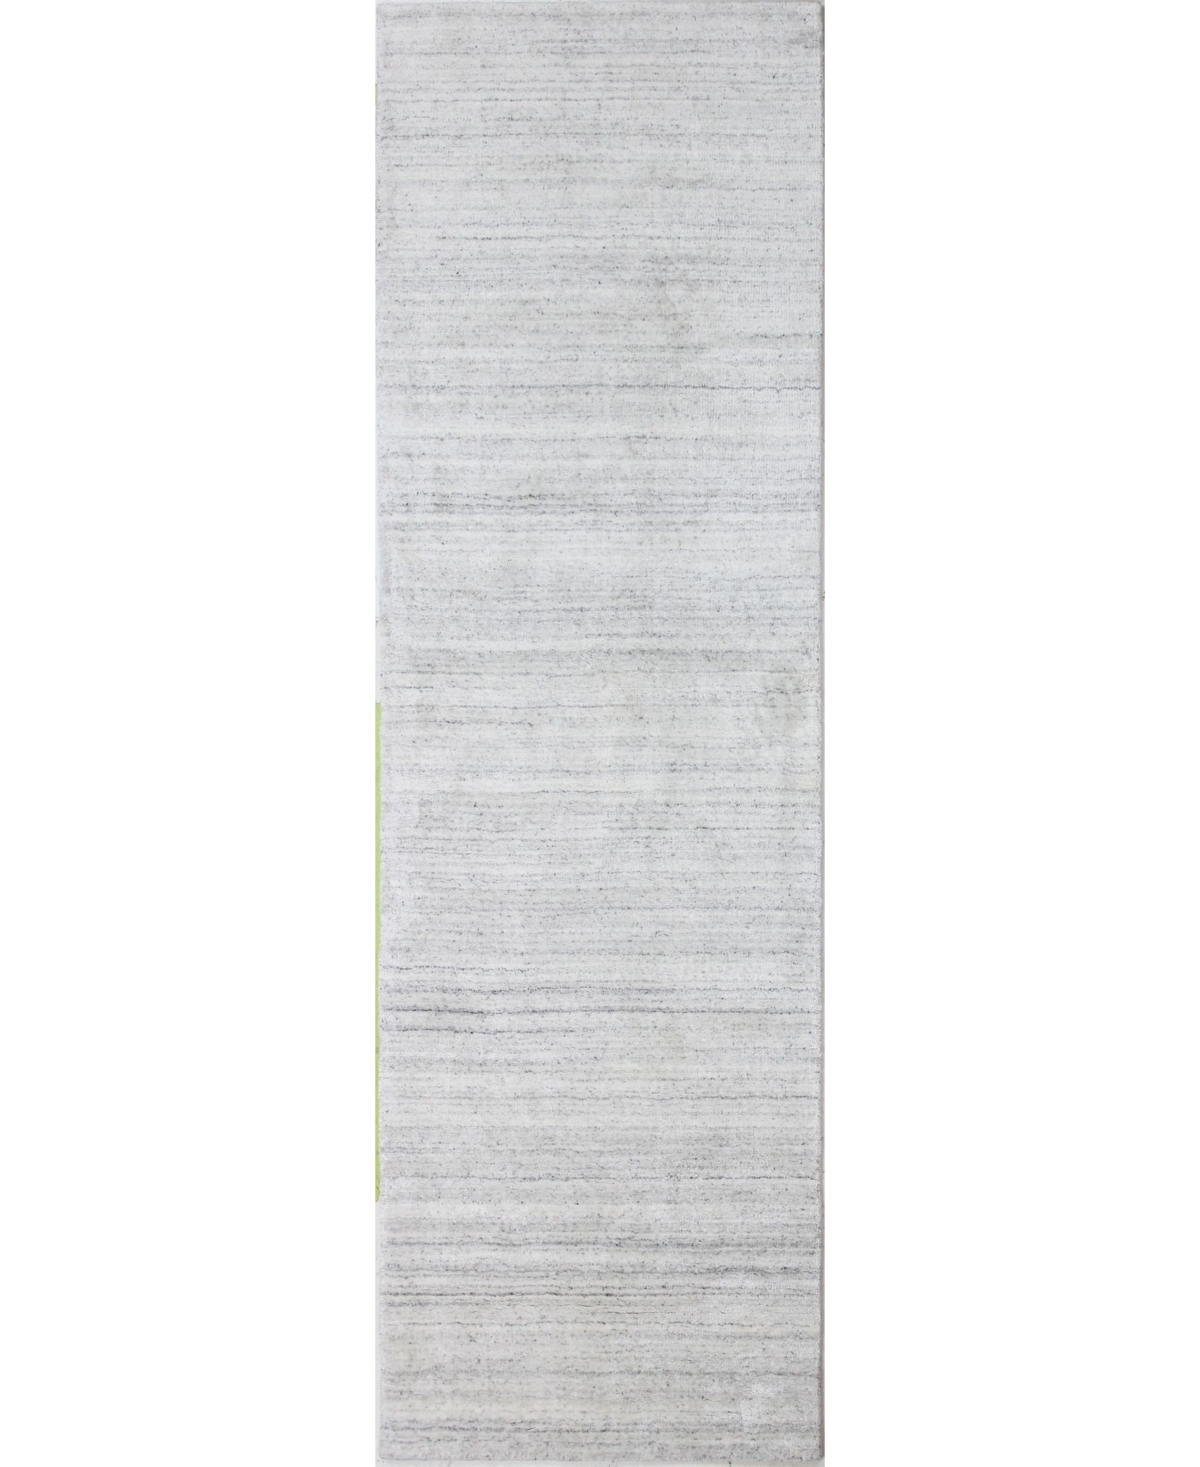 Closeout! Bb Rugs Land T142 2'6in x 8' Runner Rug - Glacier